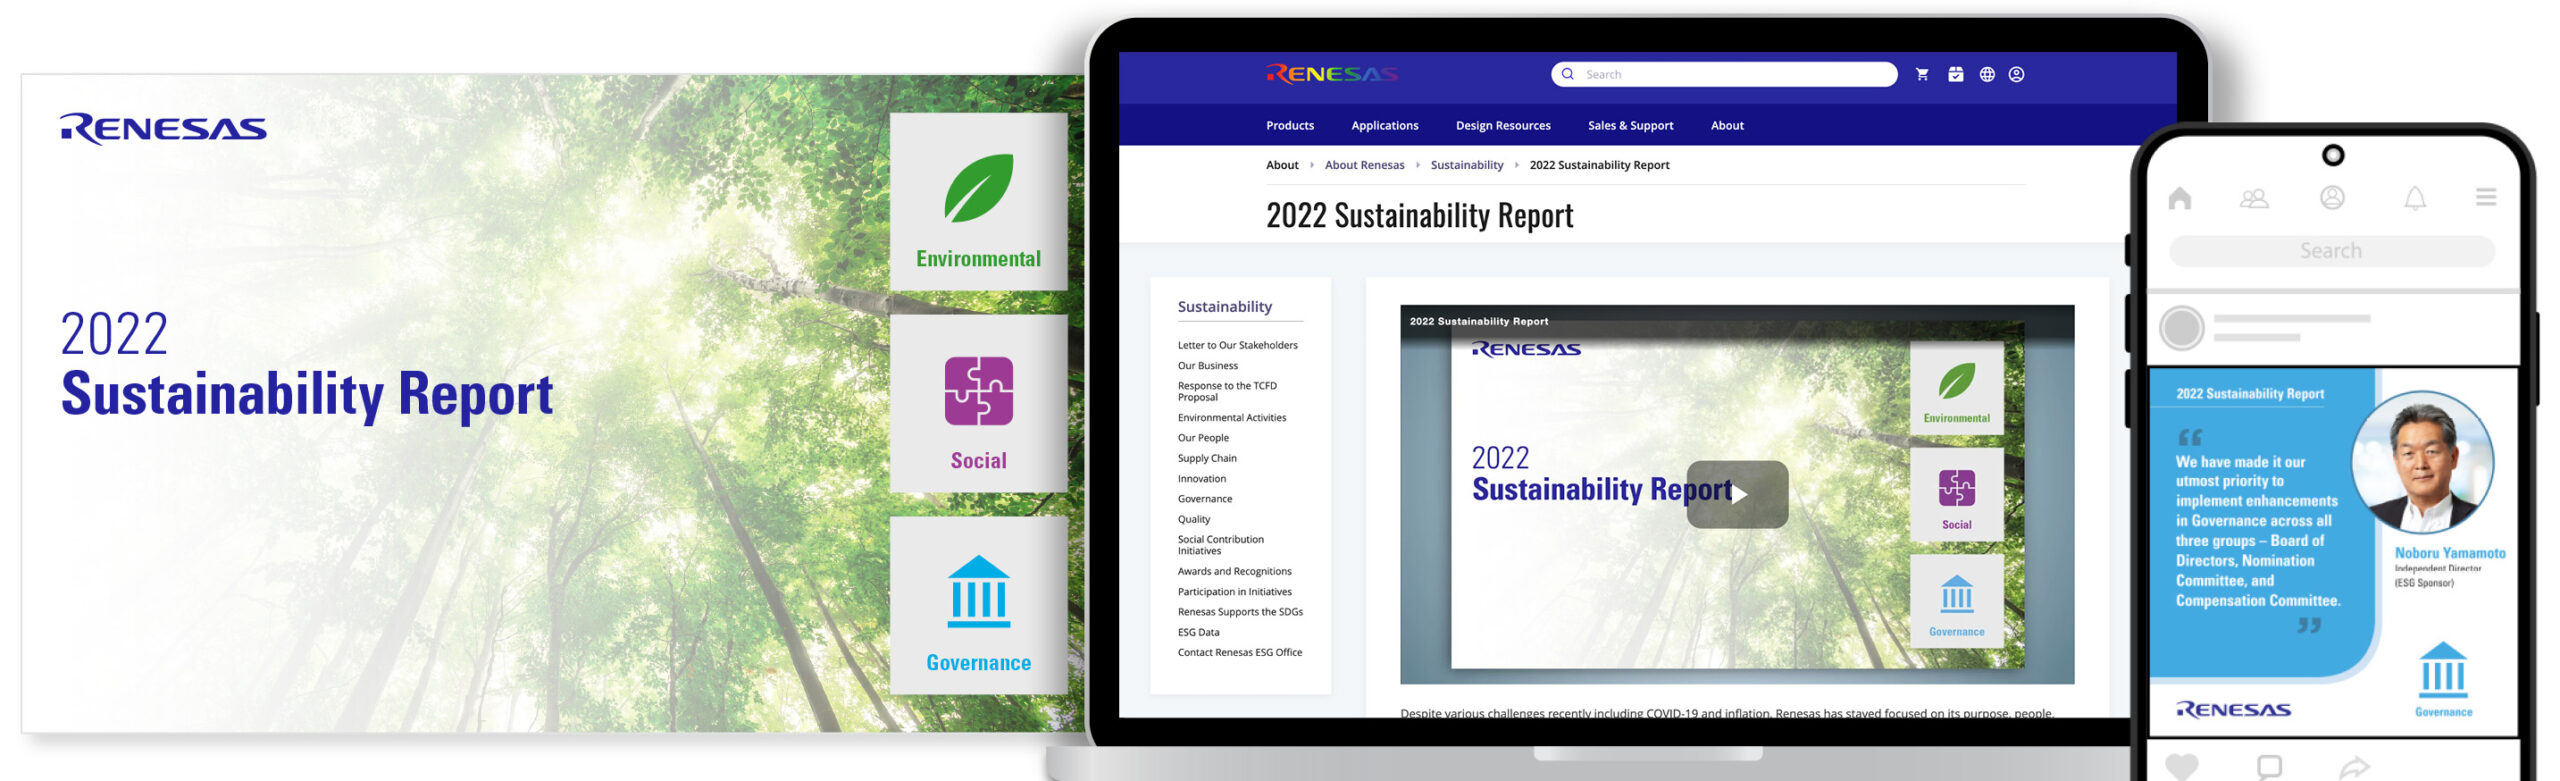 Renesas 2022 Sustainability Report and social media example